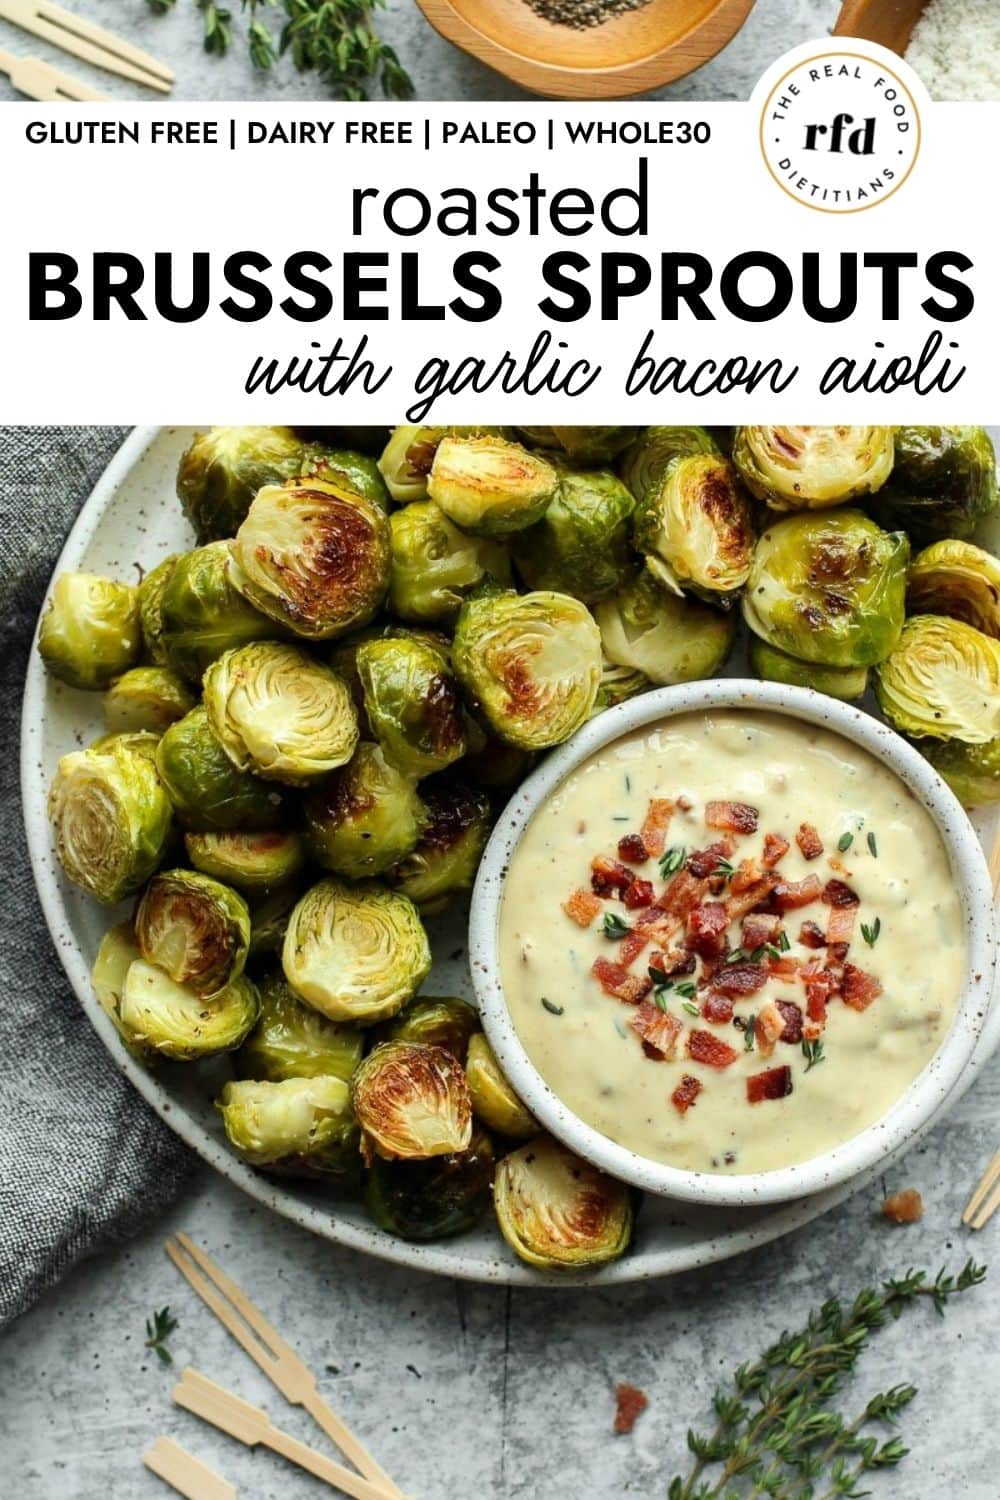 https://therealfooddietitians.com/wp-content/uploads/2021/10/Roasted-Brussels-Sprouts-with-Garlic-Bacon-Aioli-1000-x-1500-px.jpg